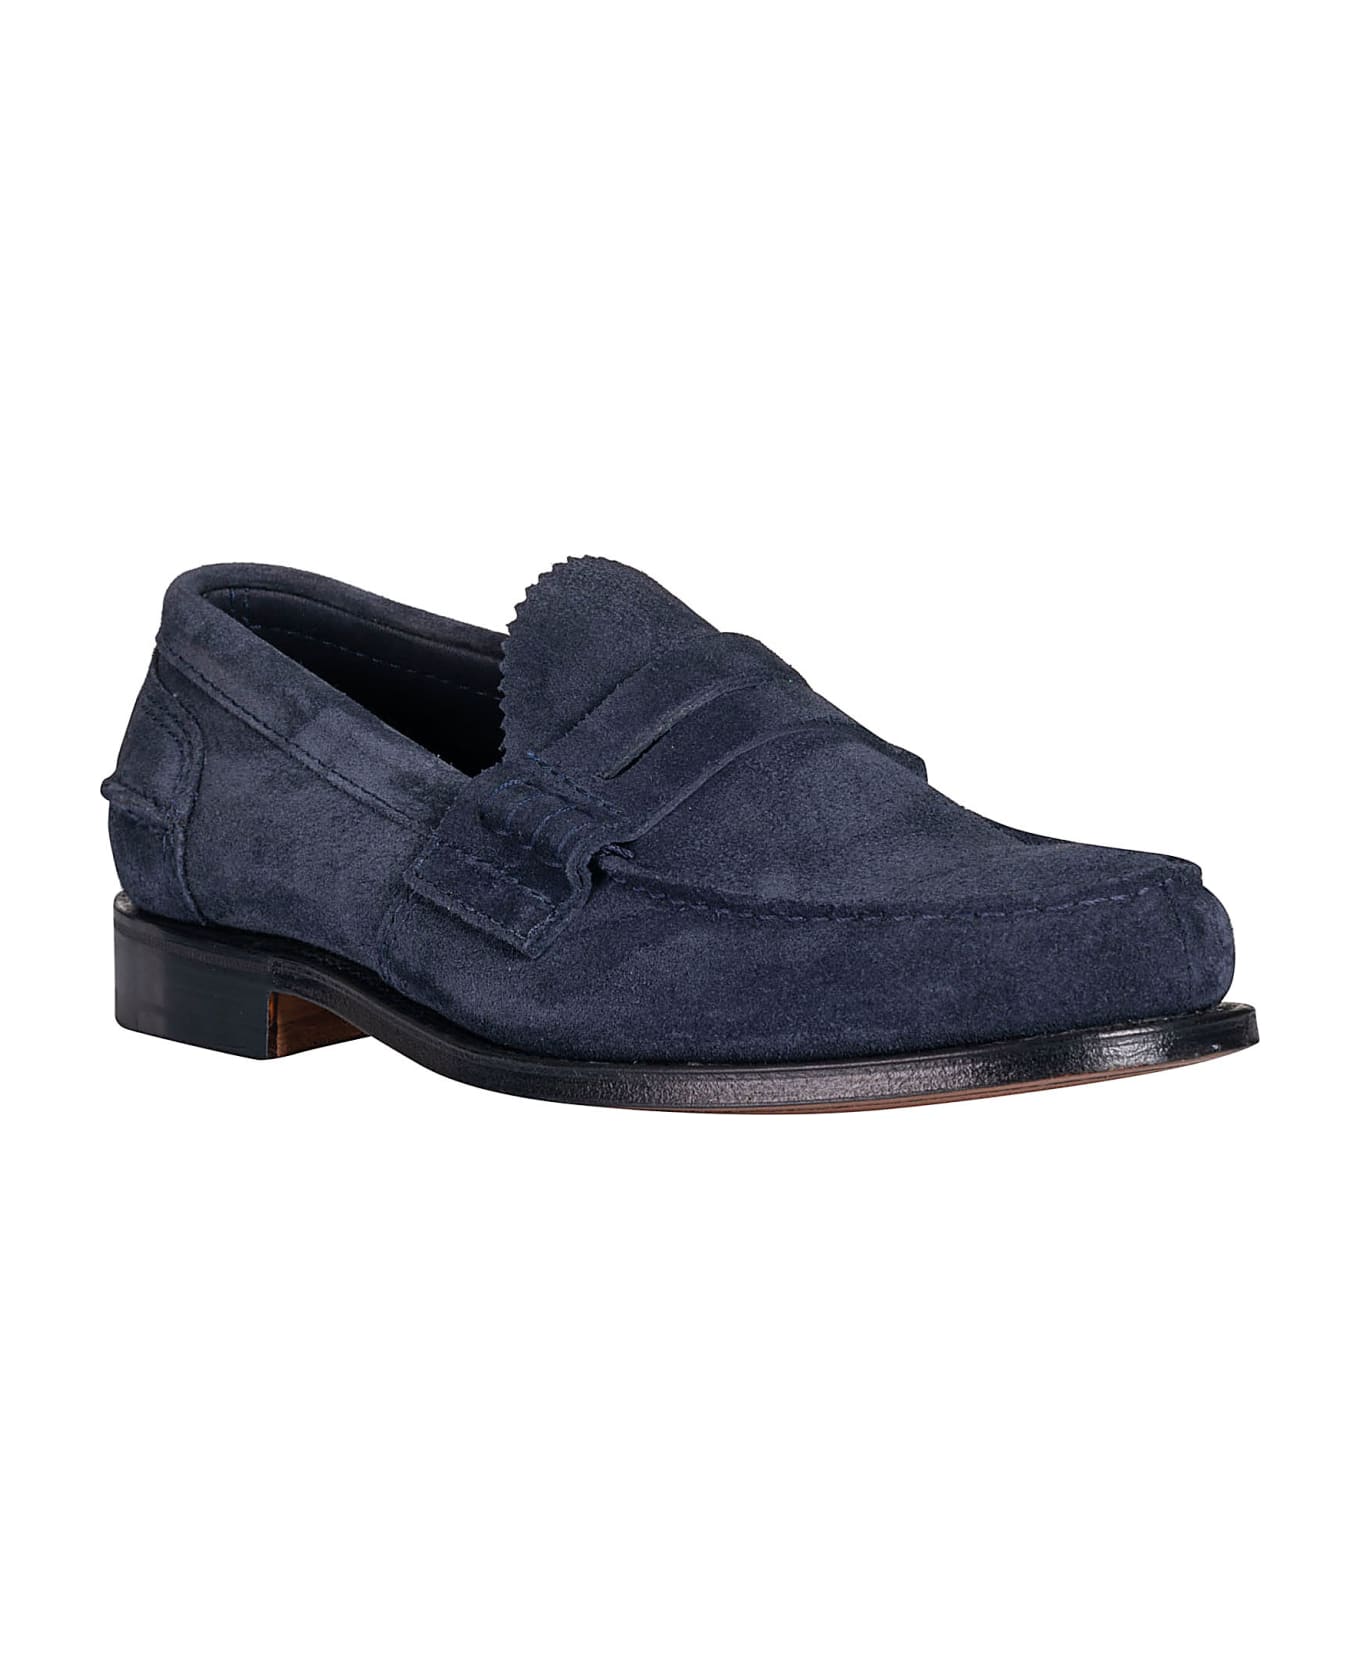 Church's Classic Loafers - Blue